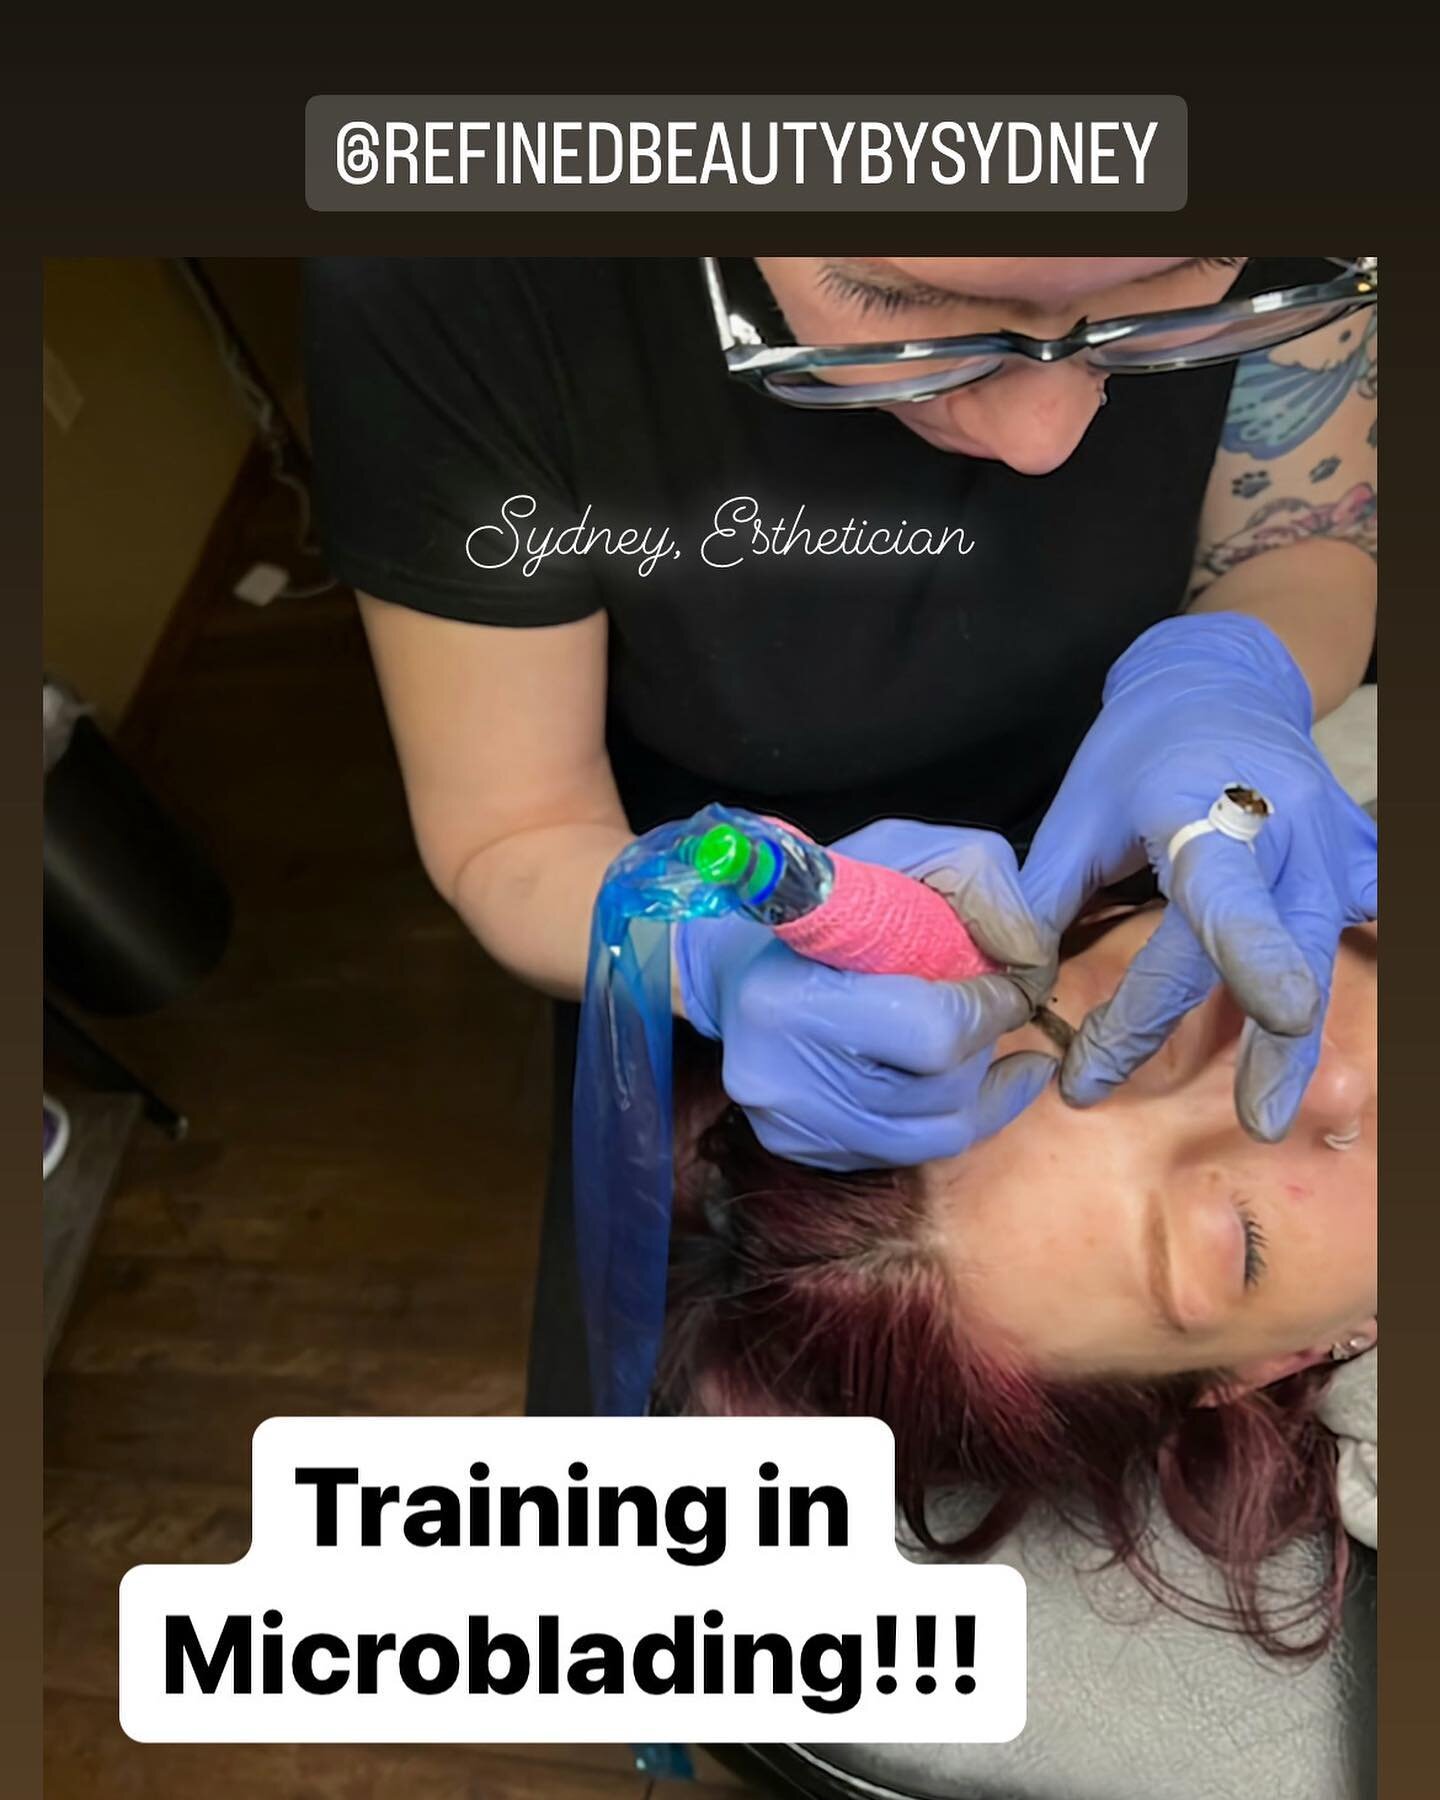 Sydney has been training this week in Microblading- She is the expert in Brows, so no question her work is impeccable!!! Way to go Sydney, we love watching you grow your skills!!🙌🙌🙌❤️✨❤️💎💎💎 #microbladingeyebrows 

 #thejewelboxsalon #spokanesal